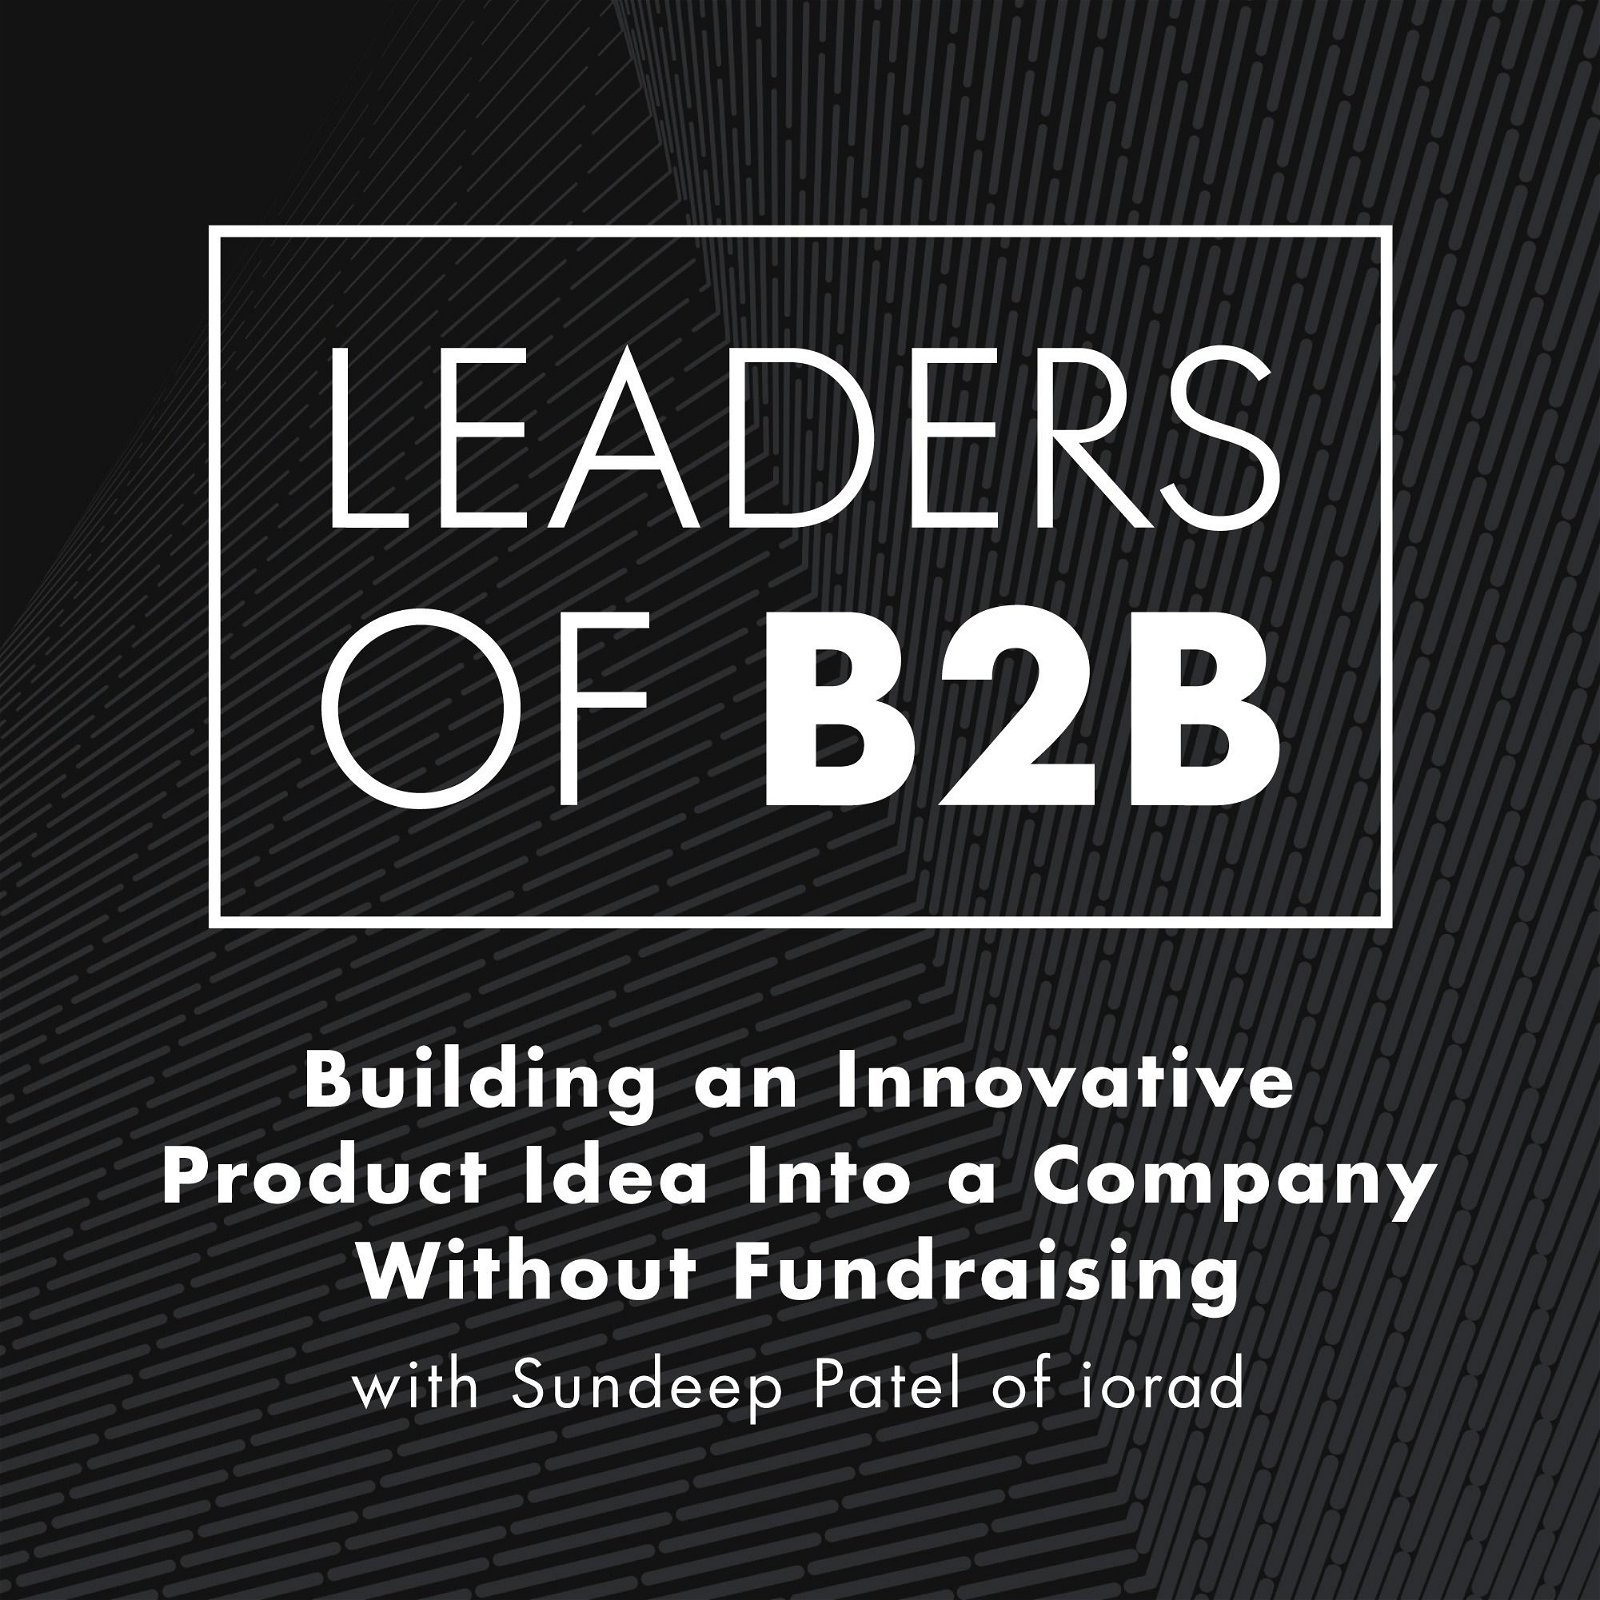 Building an Innovative Product Idea Into a Company Without Fundraising, with Sundeep Patel of iorad.